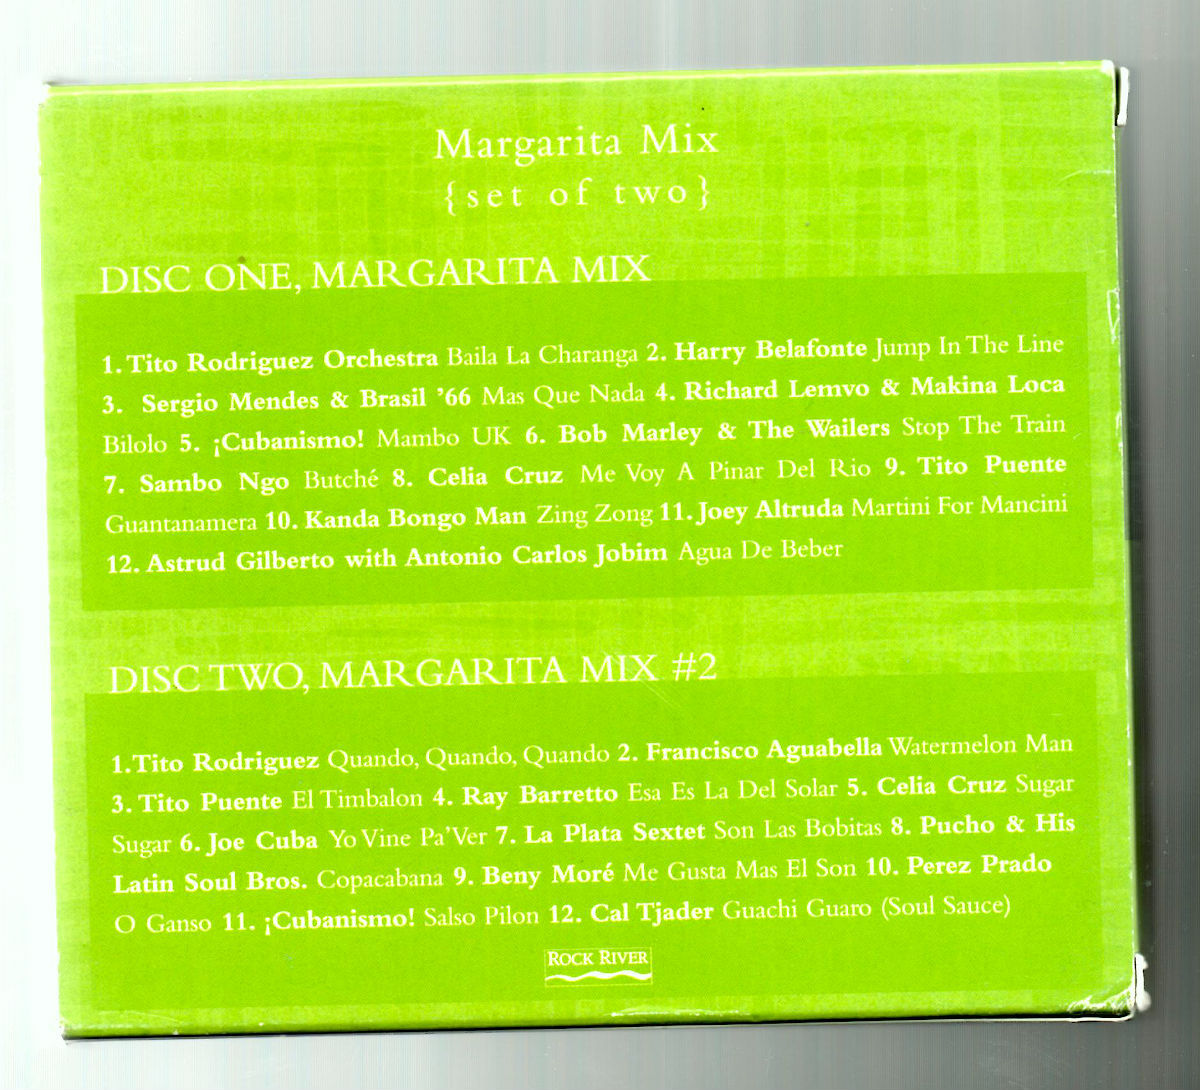 Primary image for Margarita Mix (Pottery Barn) 2 CD set